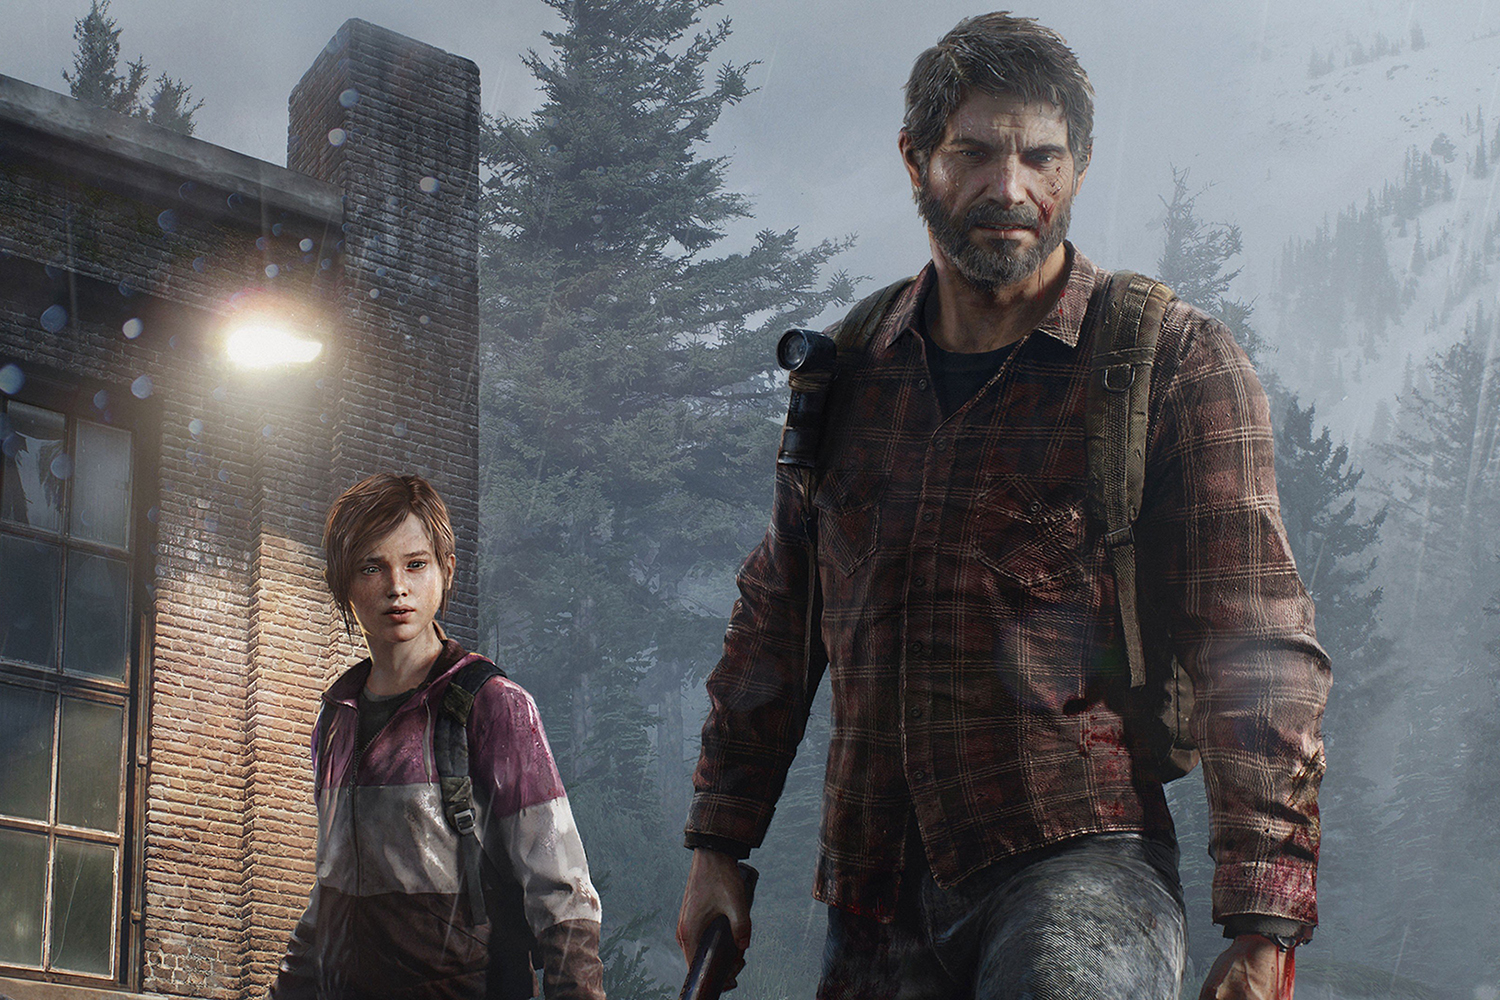 'The Last of Us' video game